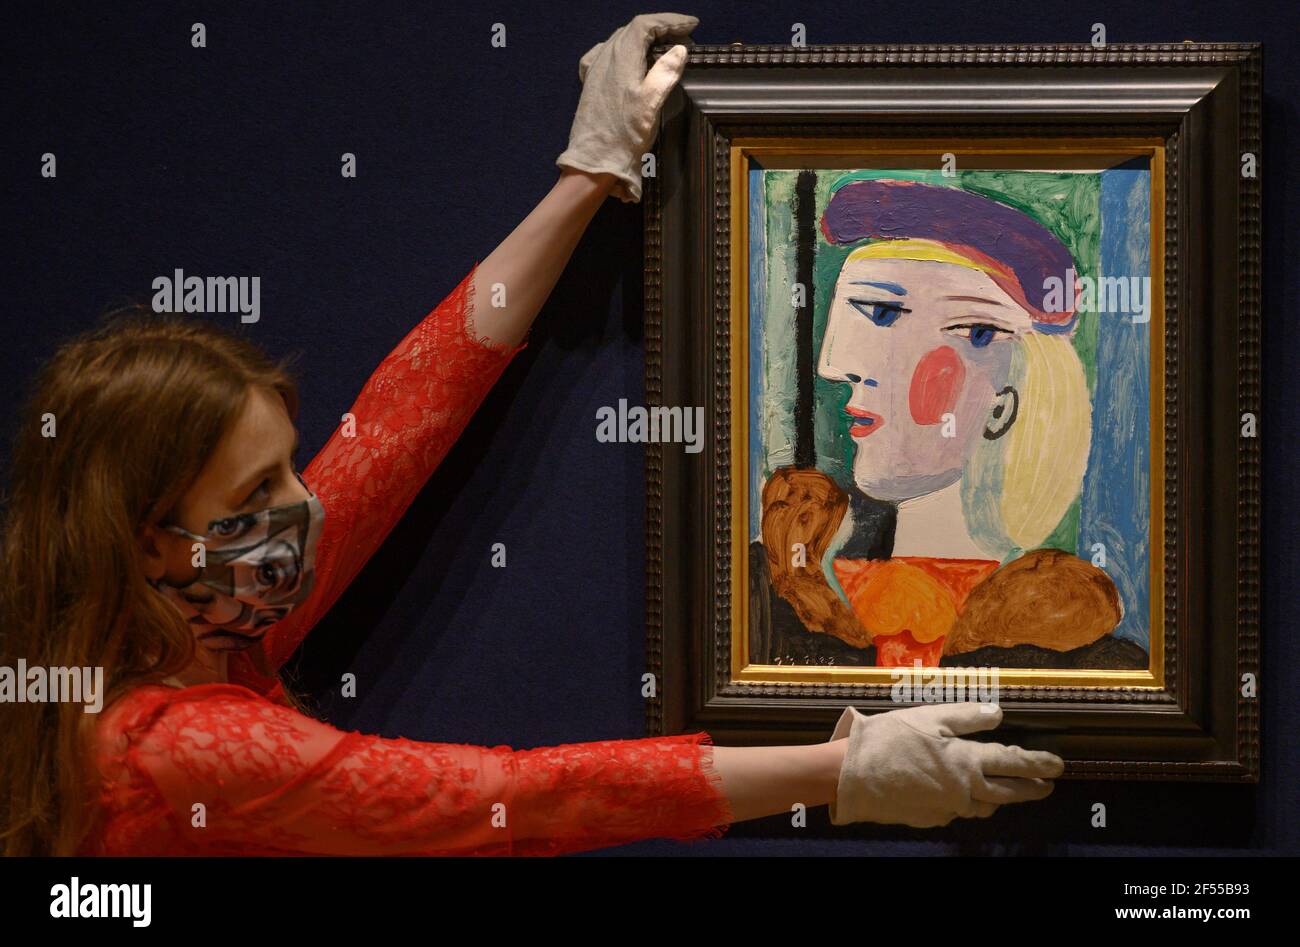 Bonhams, London, UK. 24 March 2021. A major Picasso portrait not seen for nearly 40 years, Femme au Béret Mauve, estimate $10,000,000-15,000,000, will be offered for sale at Bonhams Impressionist and Modern Art sale in New York on Thursday 13 May. Femme au Béret Mauve, painted in 1937, one of the artist’s most fruitful years during which he also produced Guernica. It is one of several depictions of Marie-Thérèse Walter painted at Le Tremblay-sur-Mauldre. Credit: Malcolm Park/Alamy Live News Stock Photo